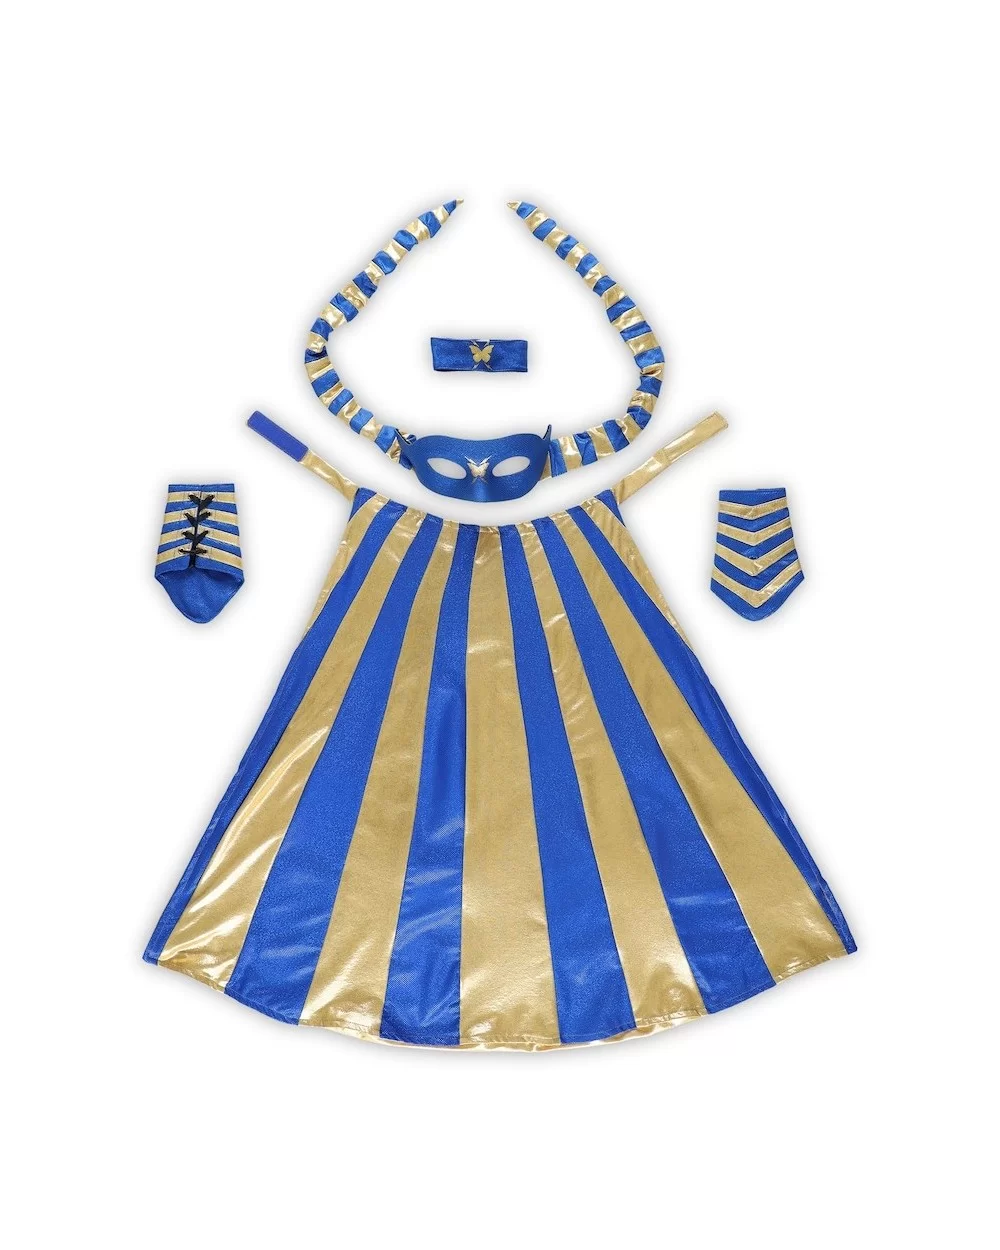 Nikki A.S.H. Armband Cape Mask and Sleeves Costume Set $15.12 Apparel